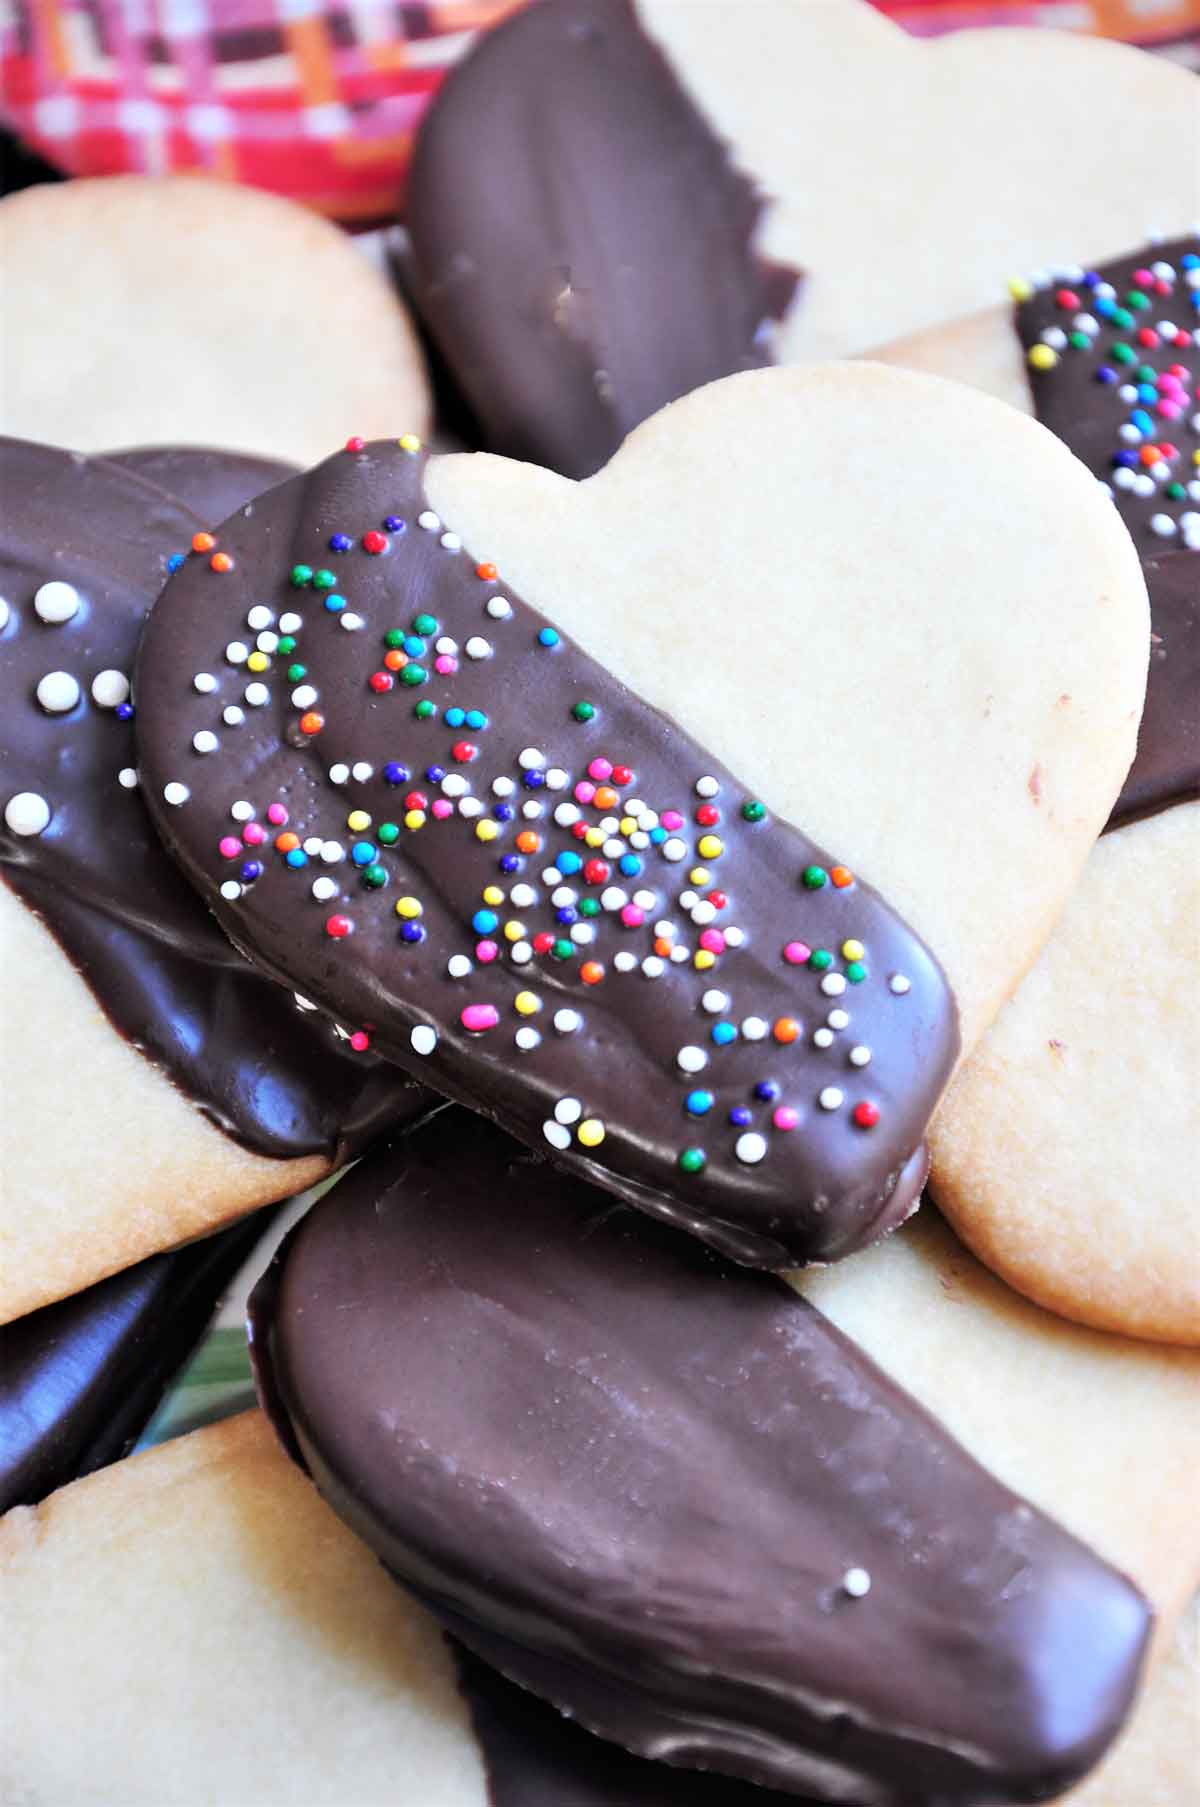 Chocolate dipped heart shaped cookies with sprinkle topping.